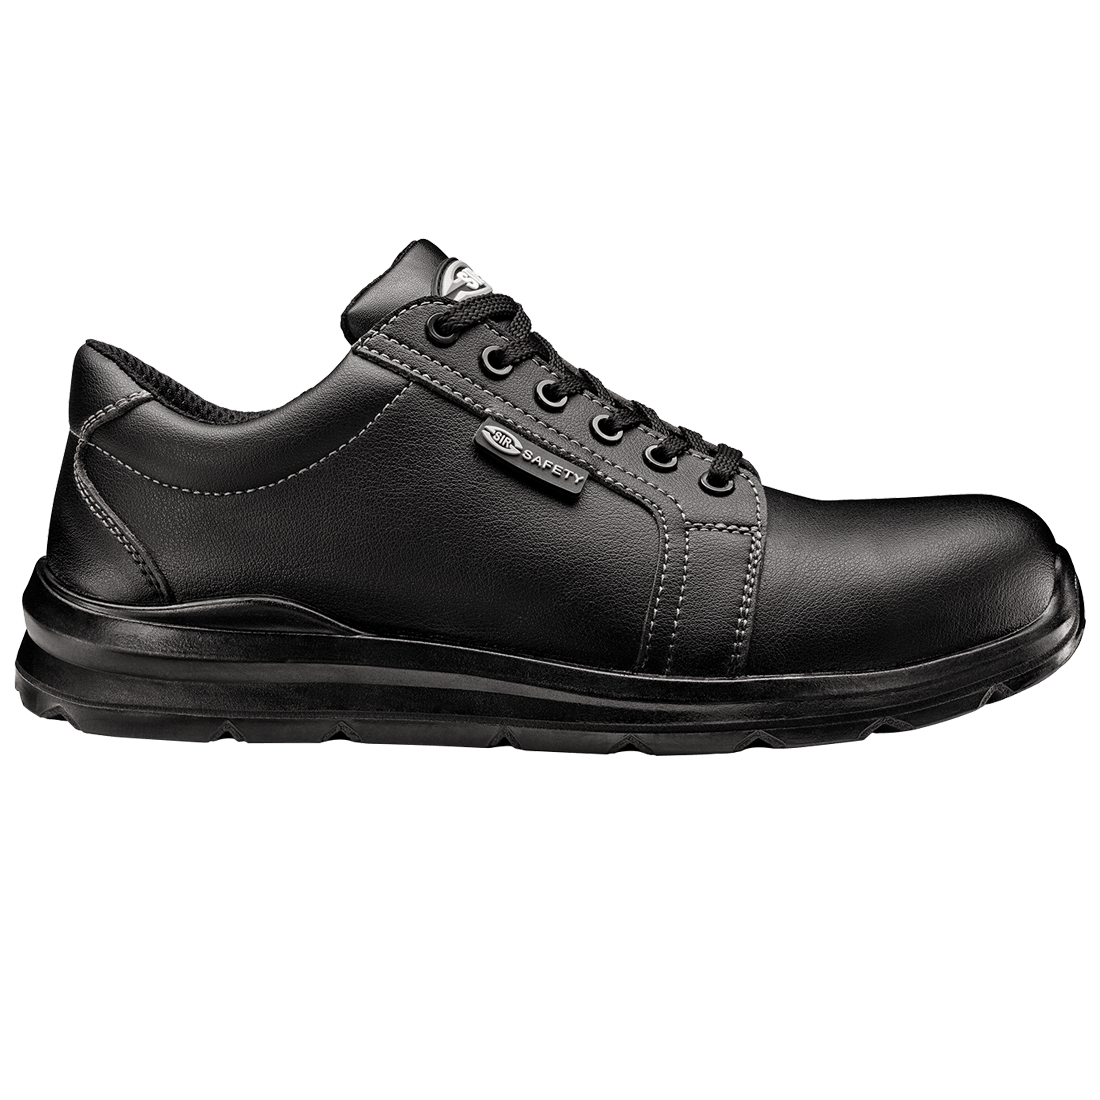 CHAUSSURE BASSE LOW BLACK FOBIA